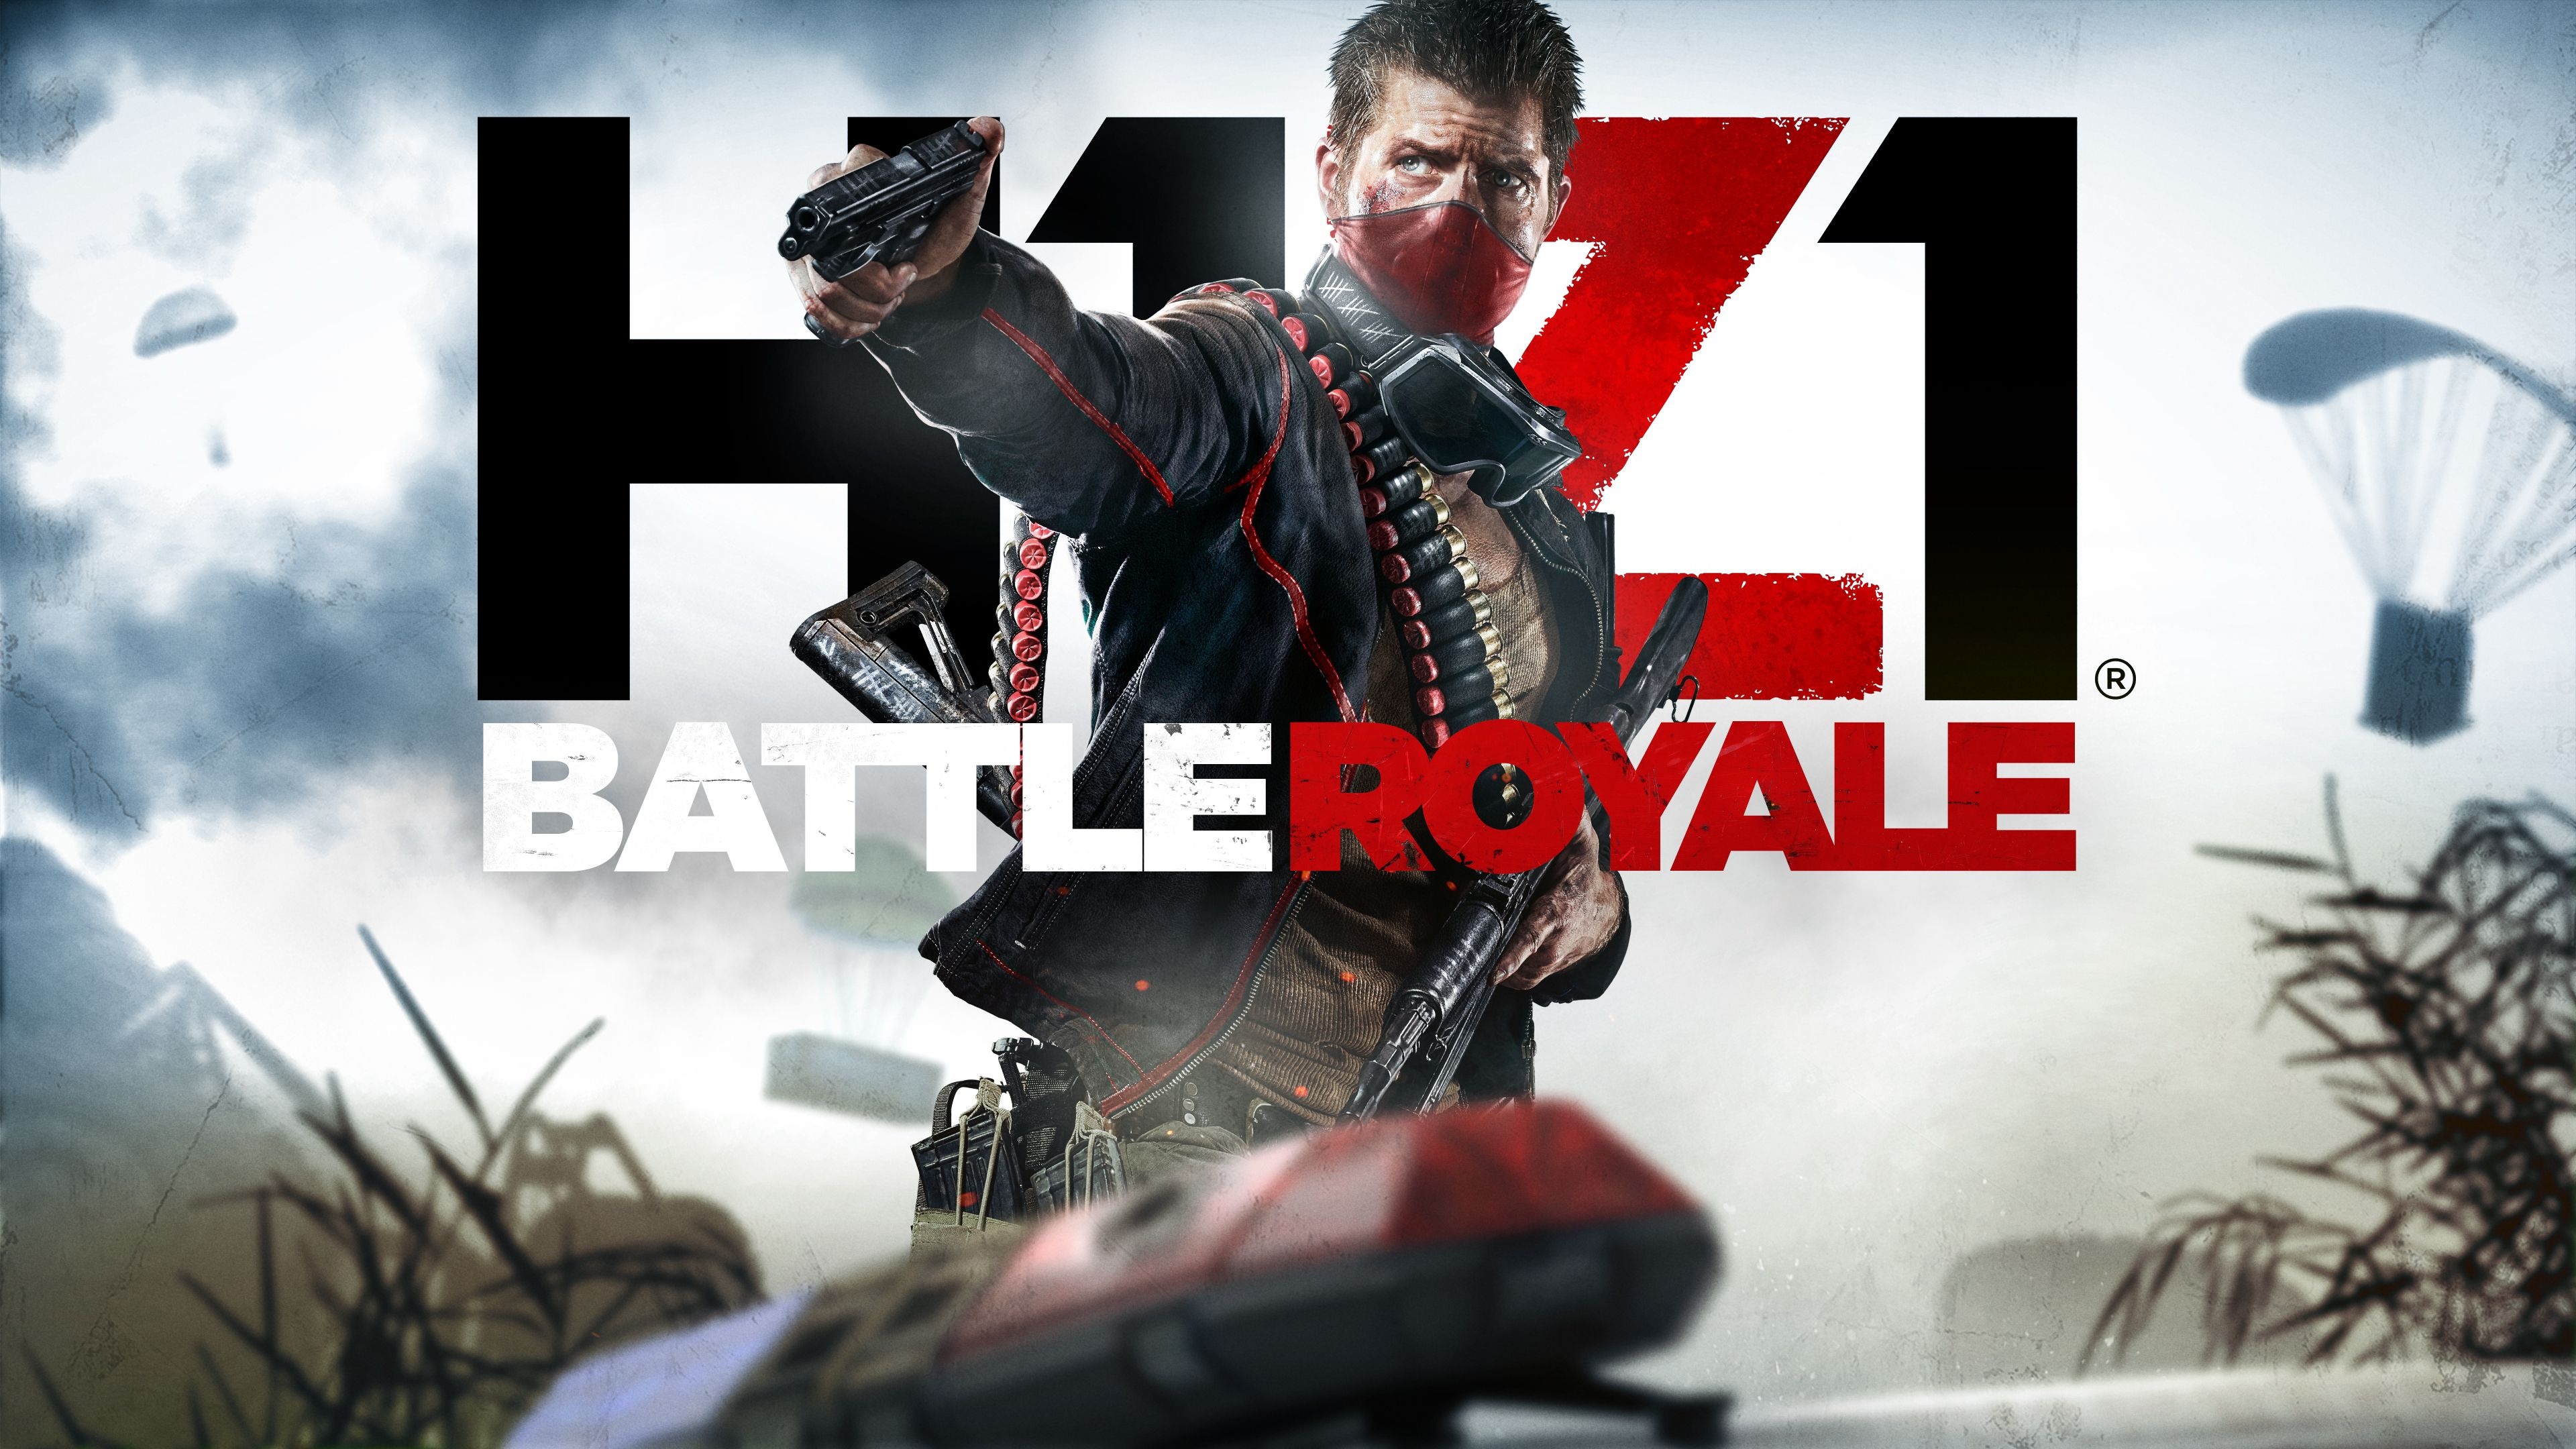 H1Z1 HQ wallpapers, Gaming art, Action-packed scenes, Epic gaming moments, 3840x2160 4K Desktop